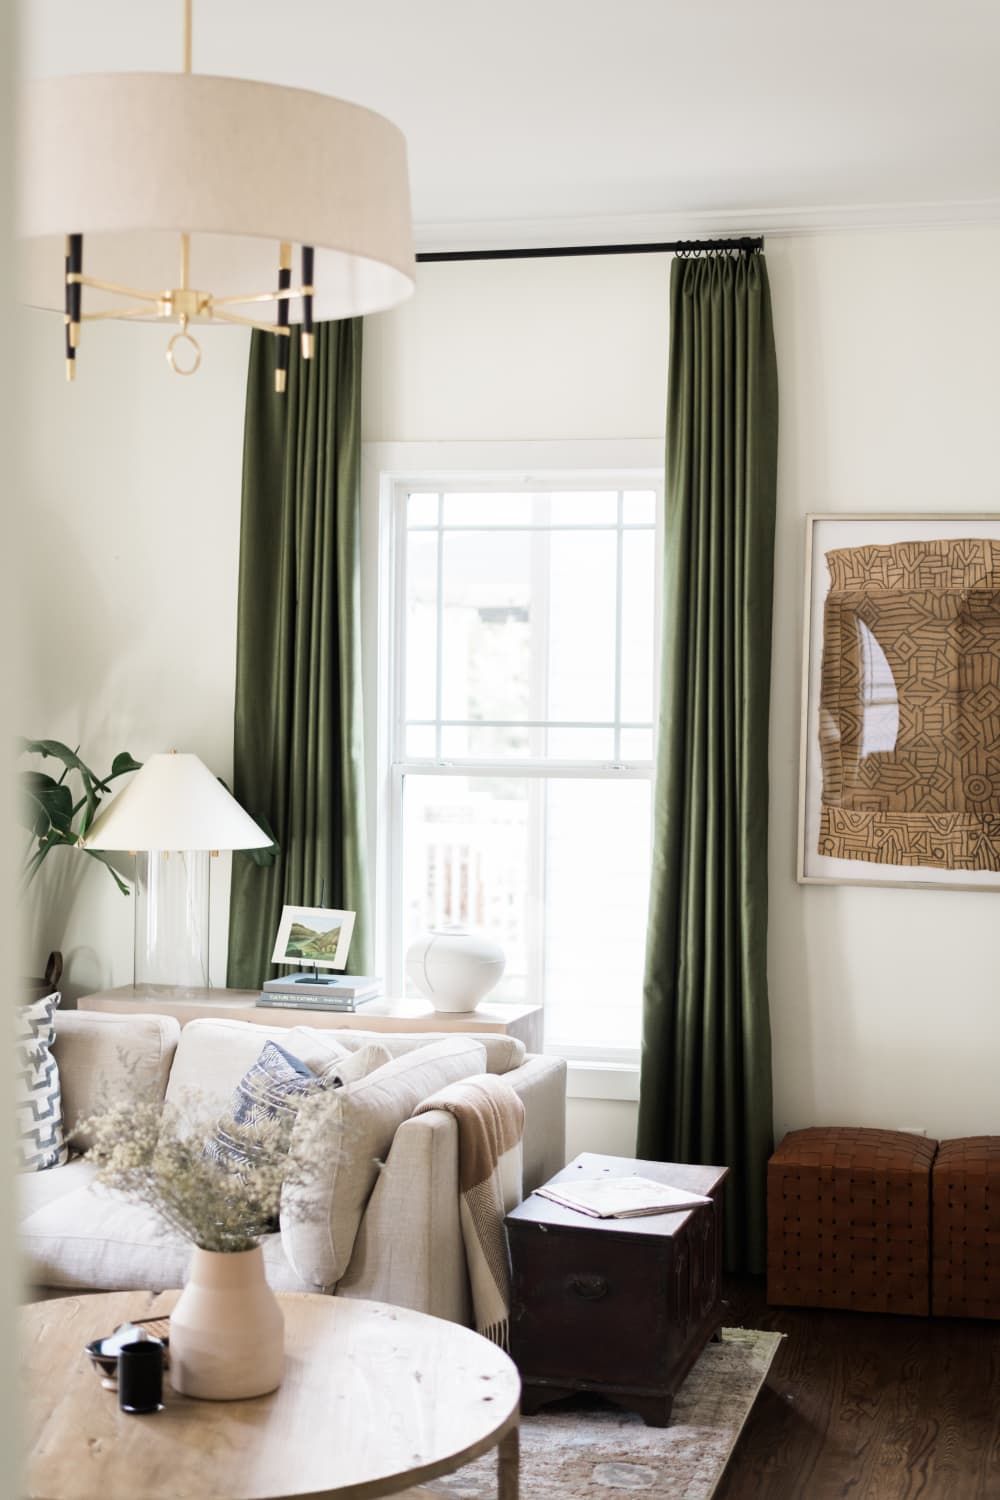 Green Curtains: Bringing Natural Vibes into Your Living Space